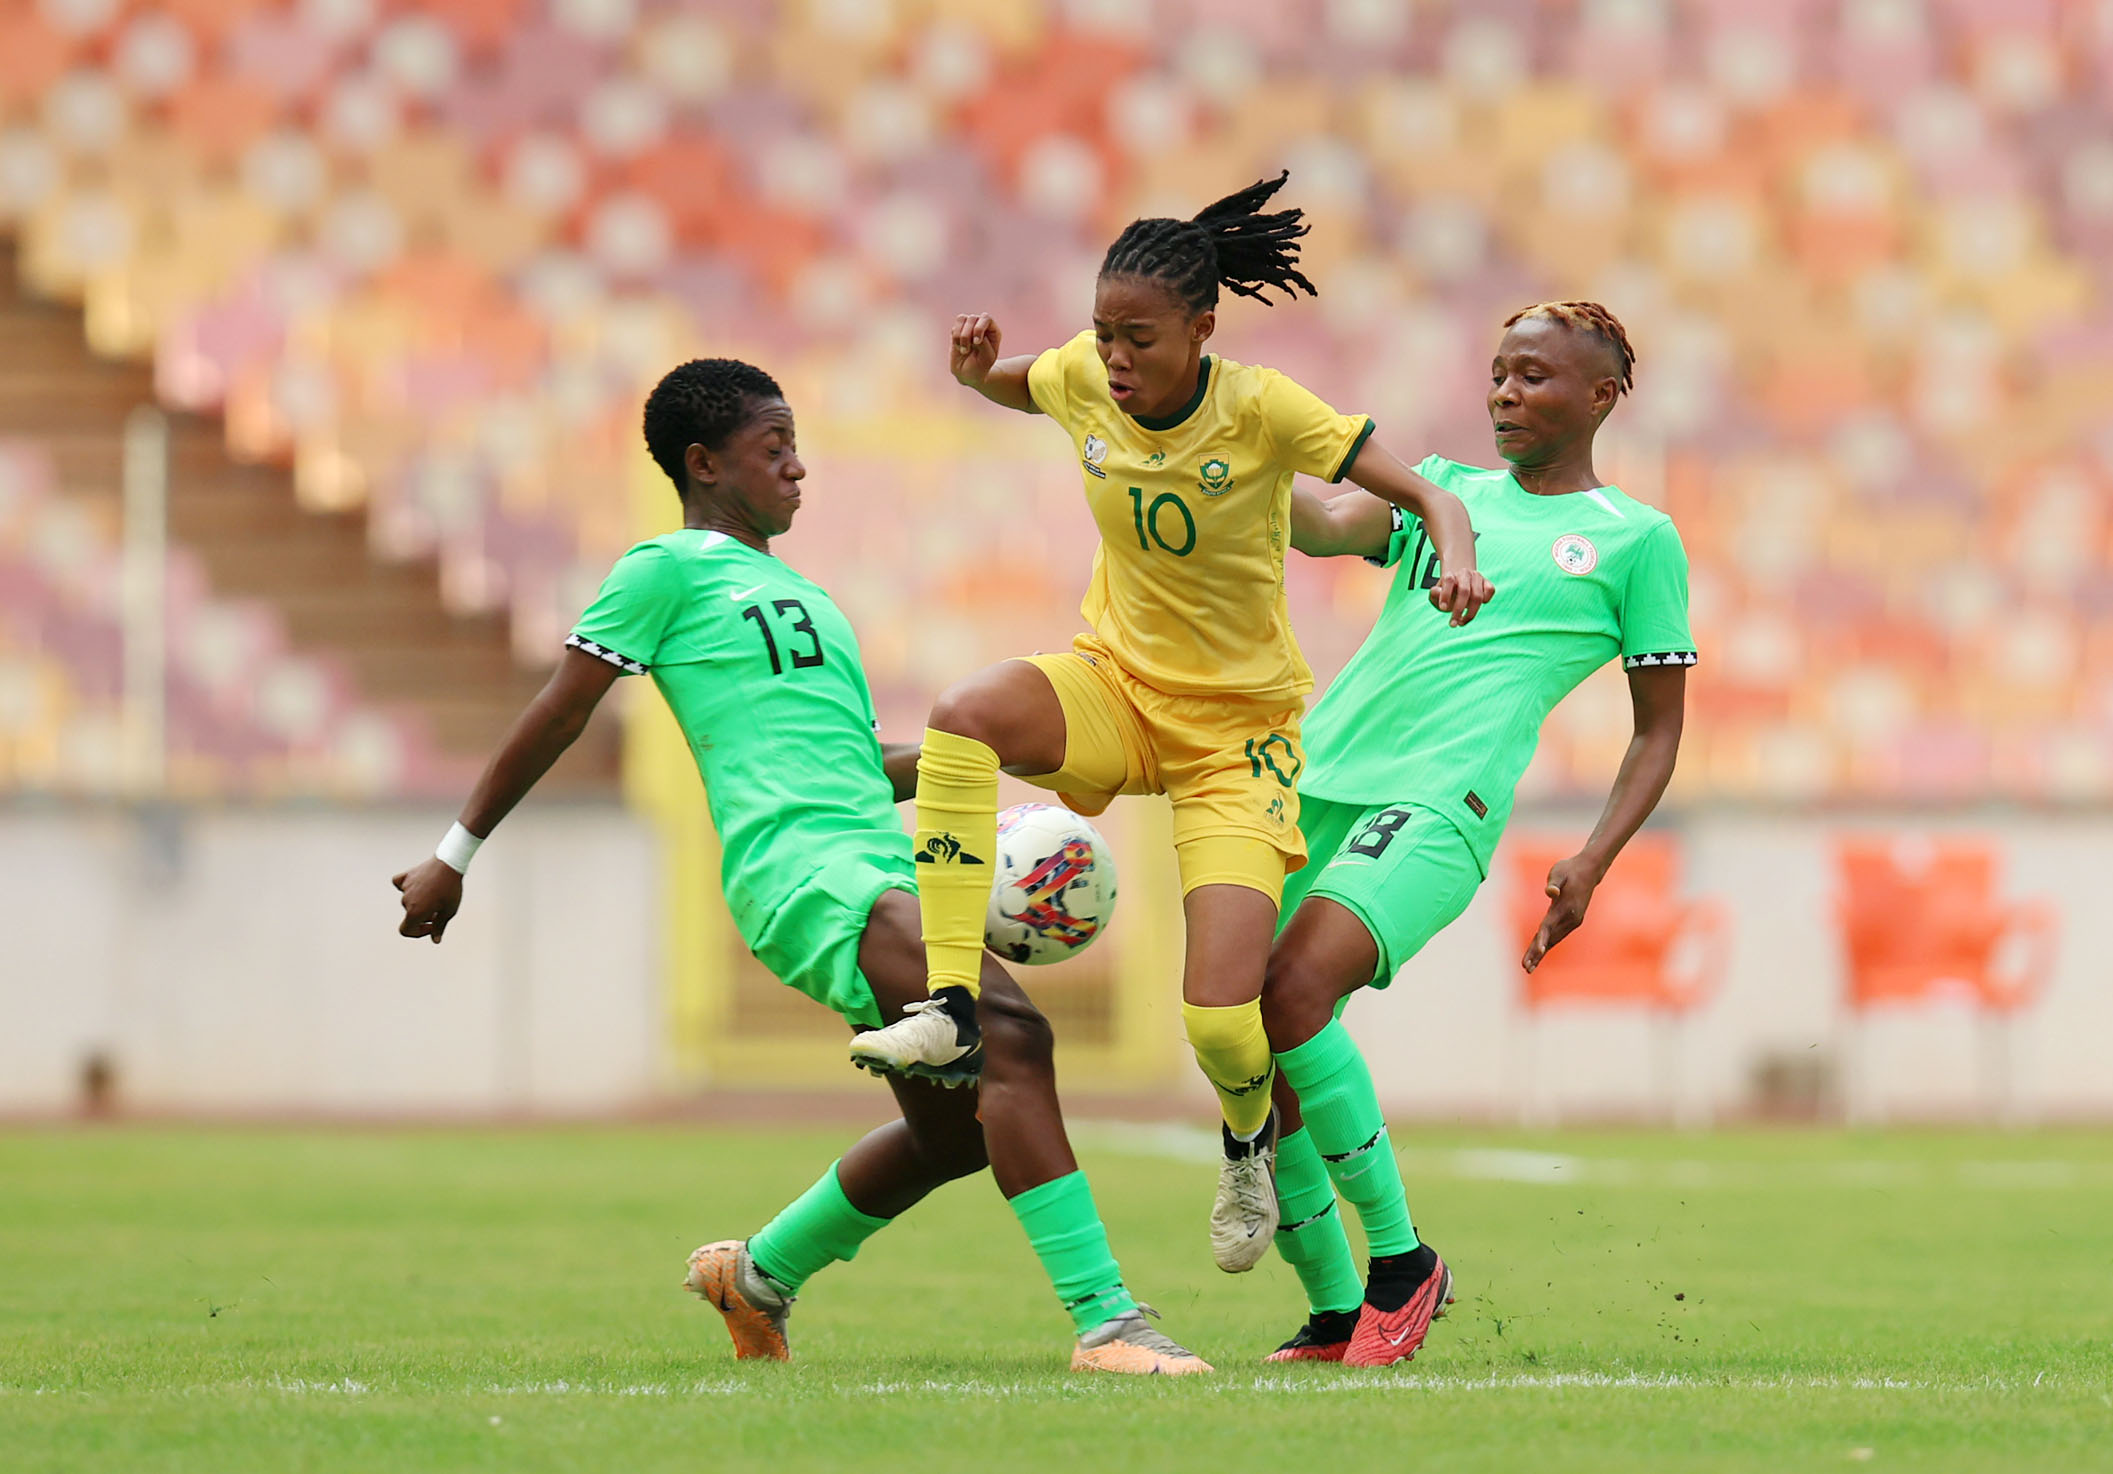 South Africa Legend pained to lose to ‘poor’ Super Falcons